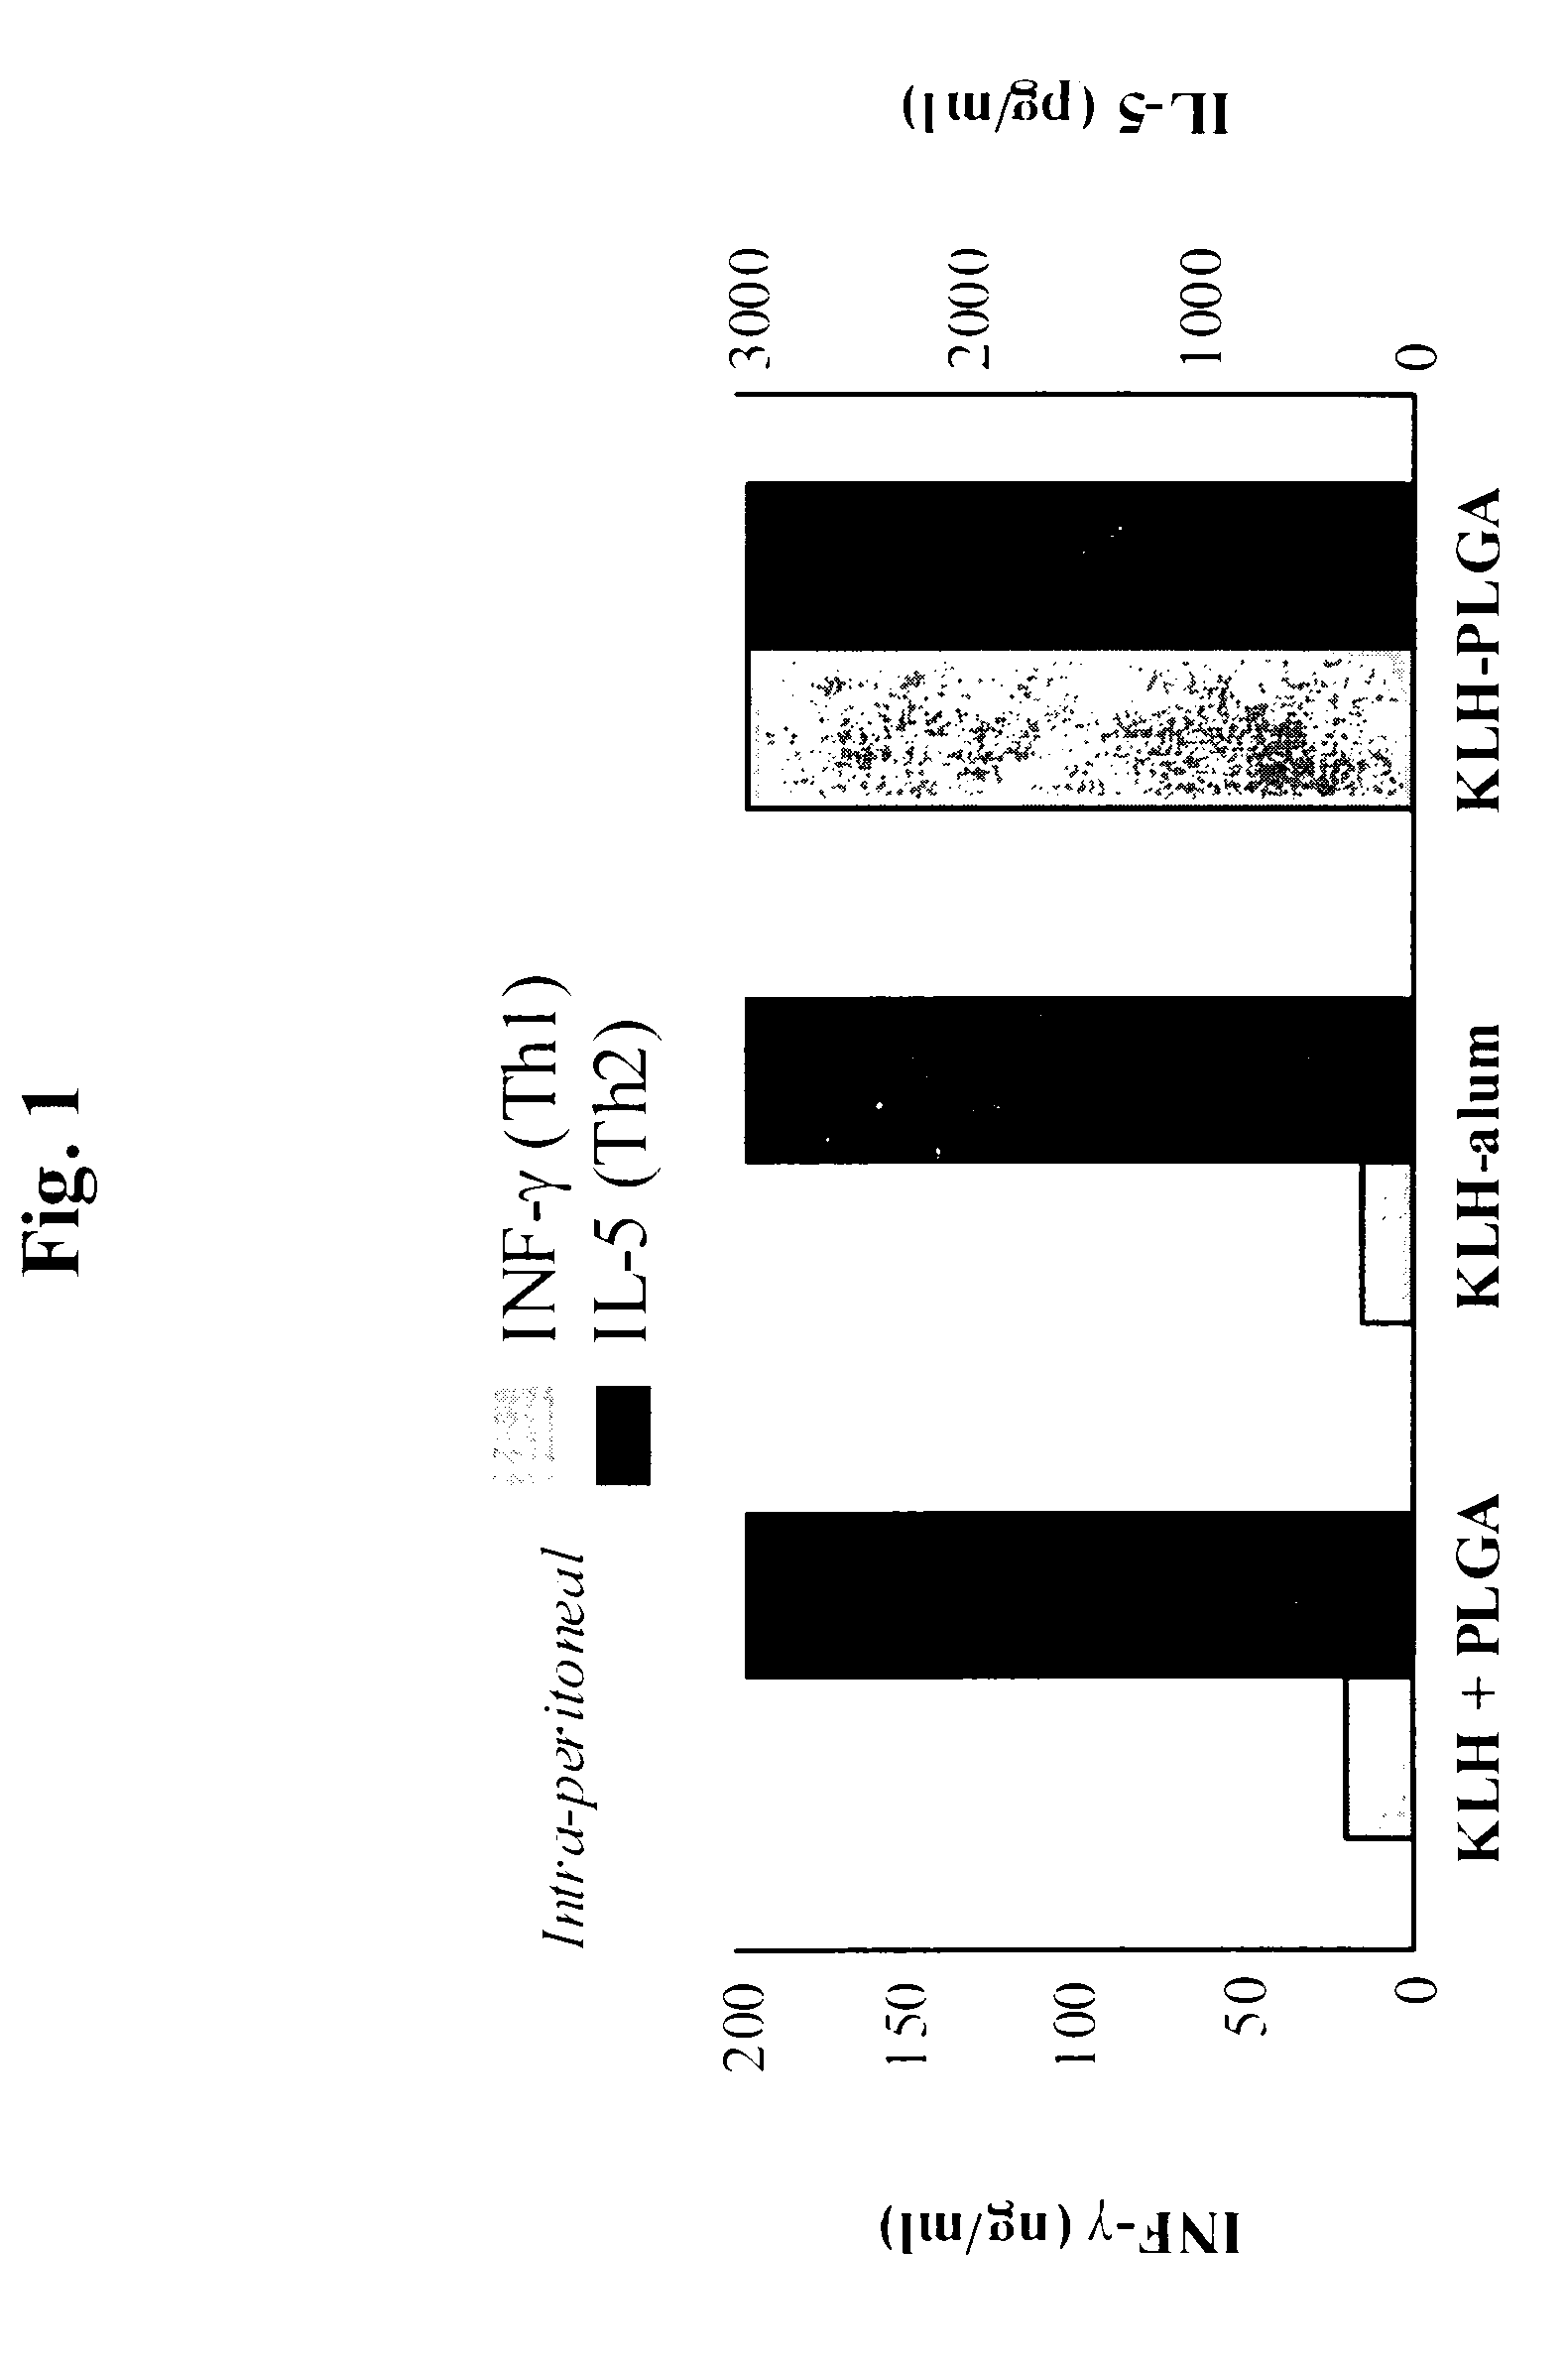 Method for inducing a cell-mediated immune response and improved parenteral vaccine formulations thereof